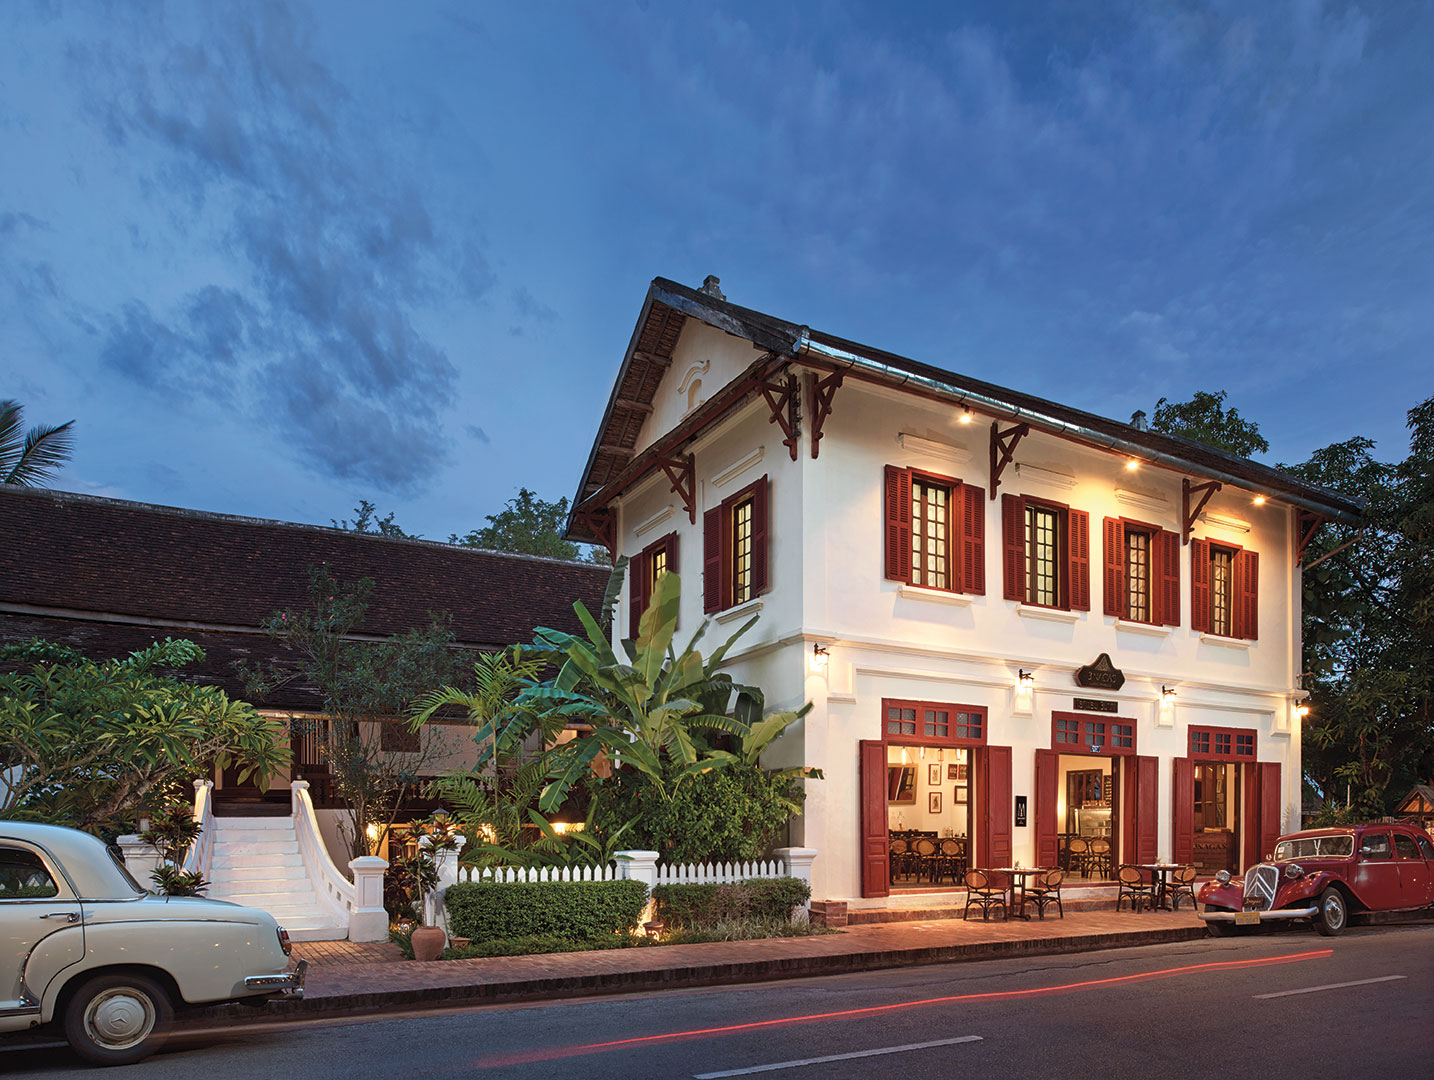 One of the three historical buildings comprising the revamped 3 Nagas hotel. 